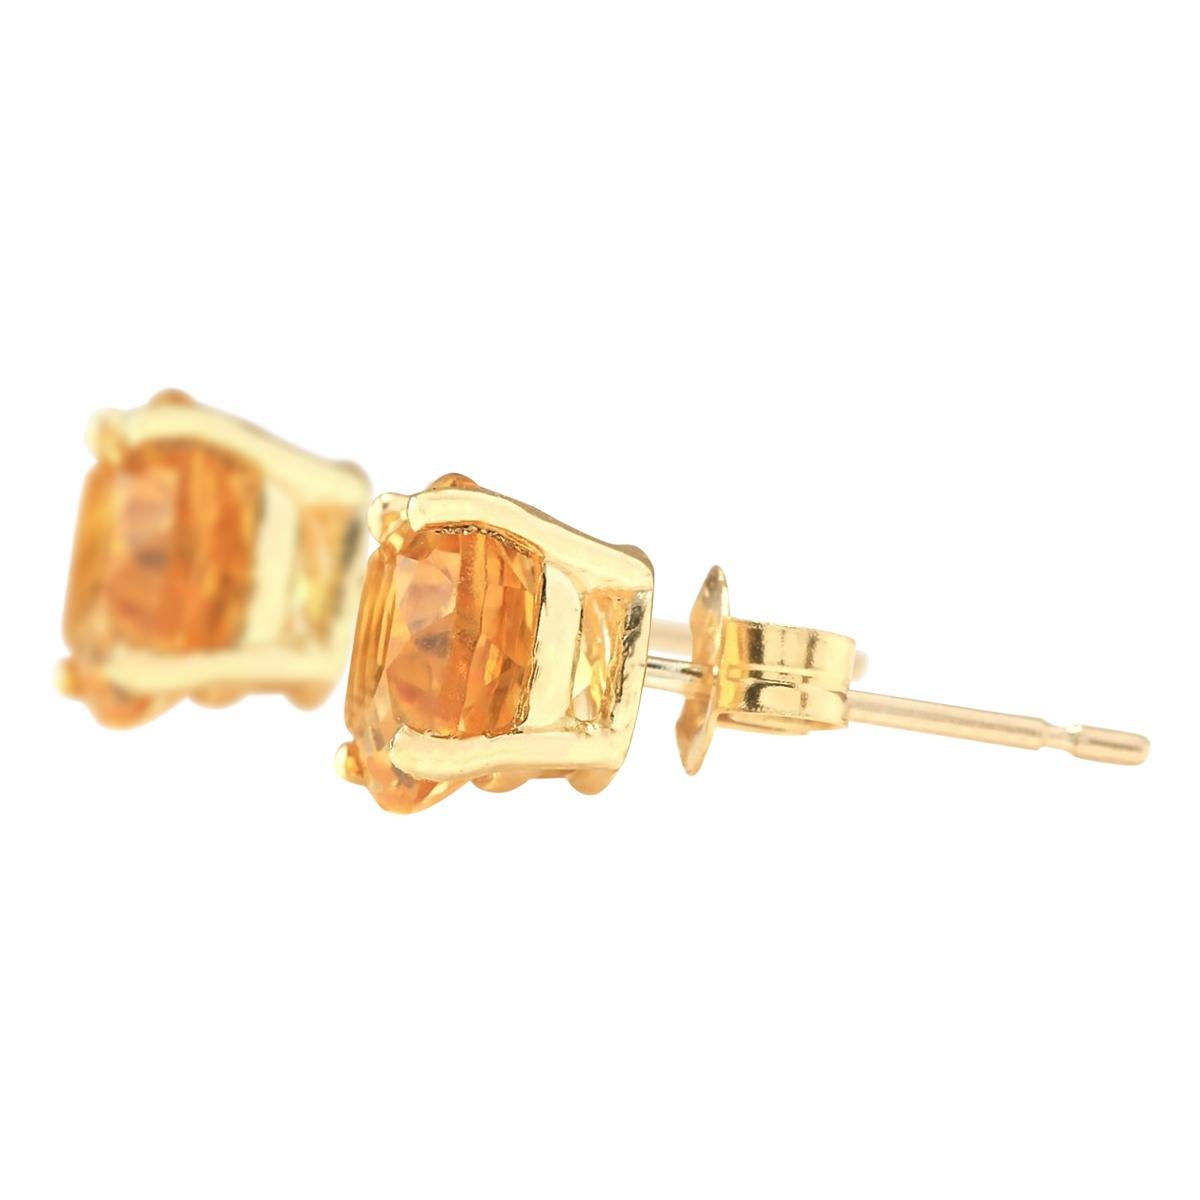 Introducing our elegant 14K Yellow Gold Earrings adorned with exquisite 3.00 Carat Citrine gemstones. These earrings are stamped for authenticity and weigh a total of 1.2 grams. The Citrine gemstones, each weighing 3.00 Carats, radiate with a warm